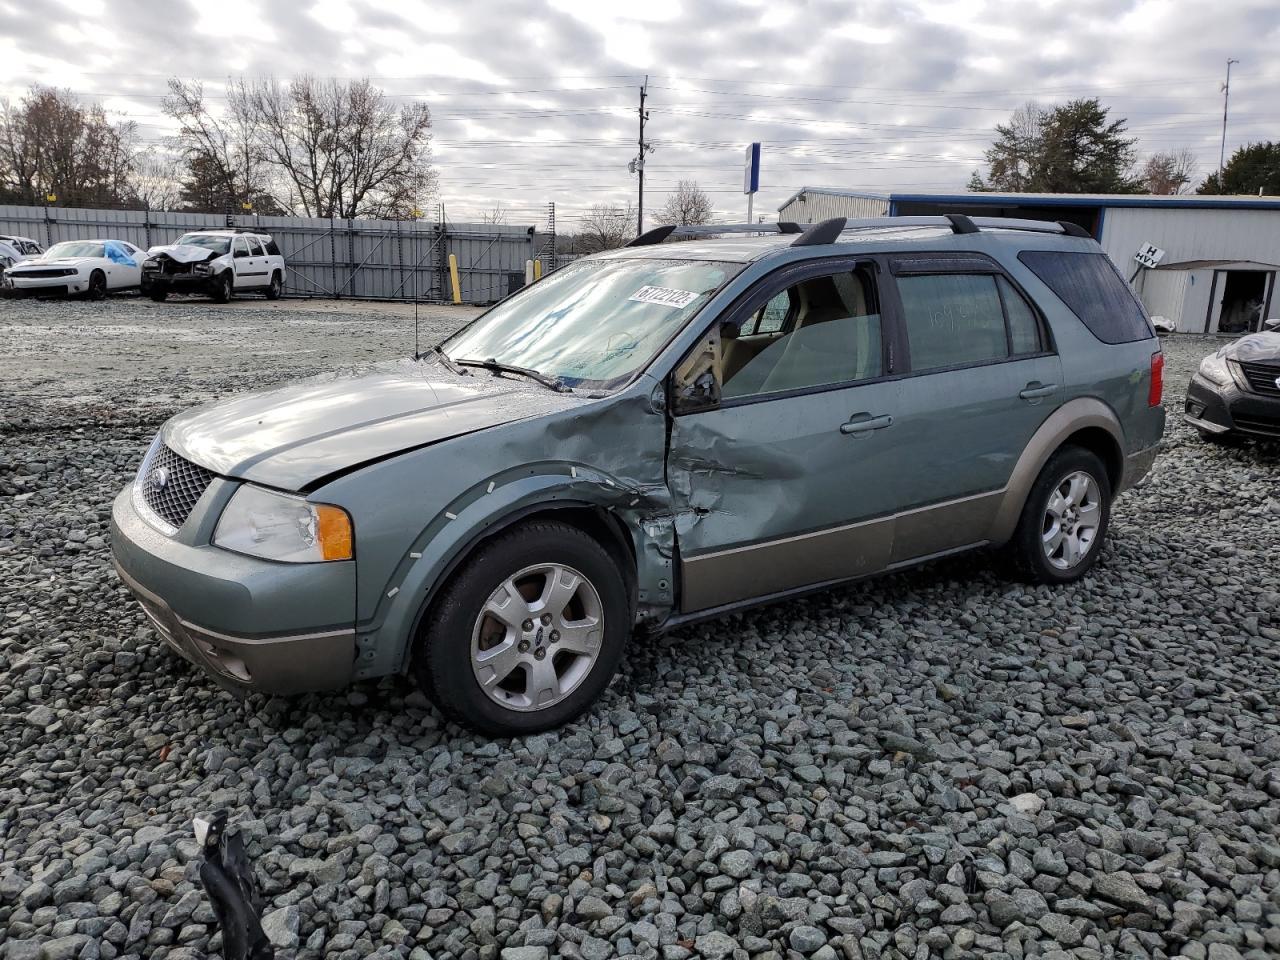 Used 2006 FORD FREESTYLE DETAILS - Pick N Save